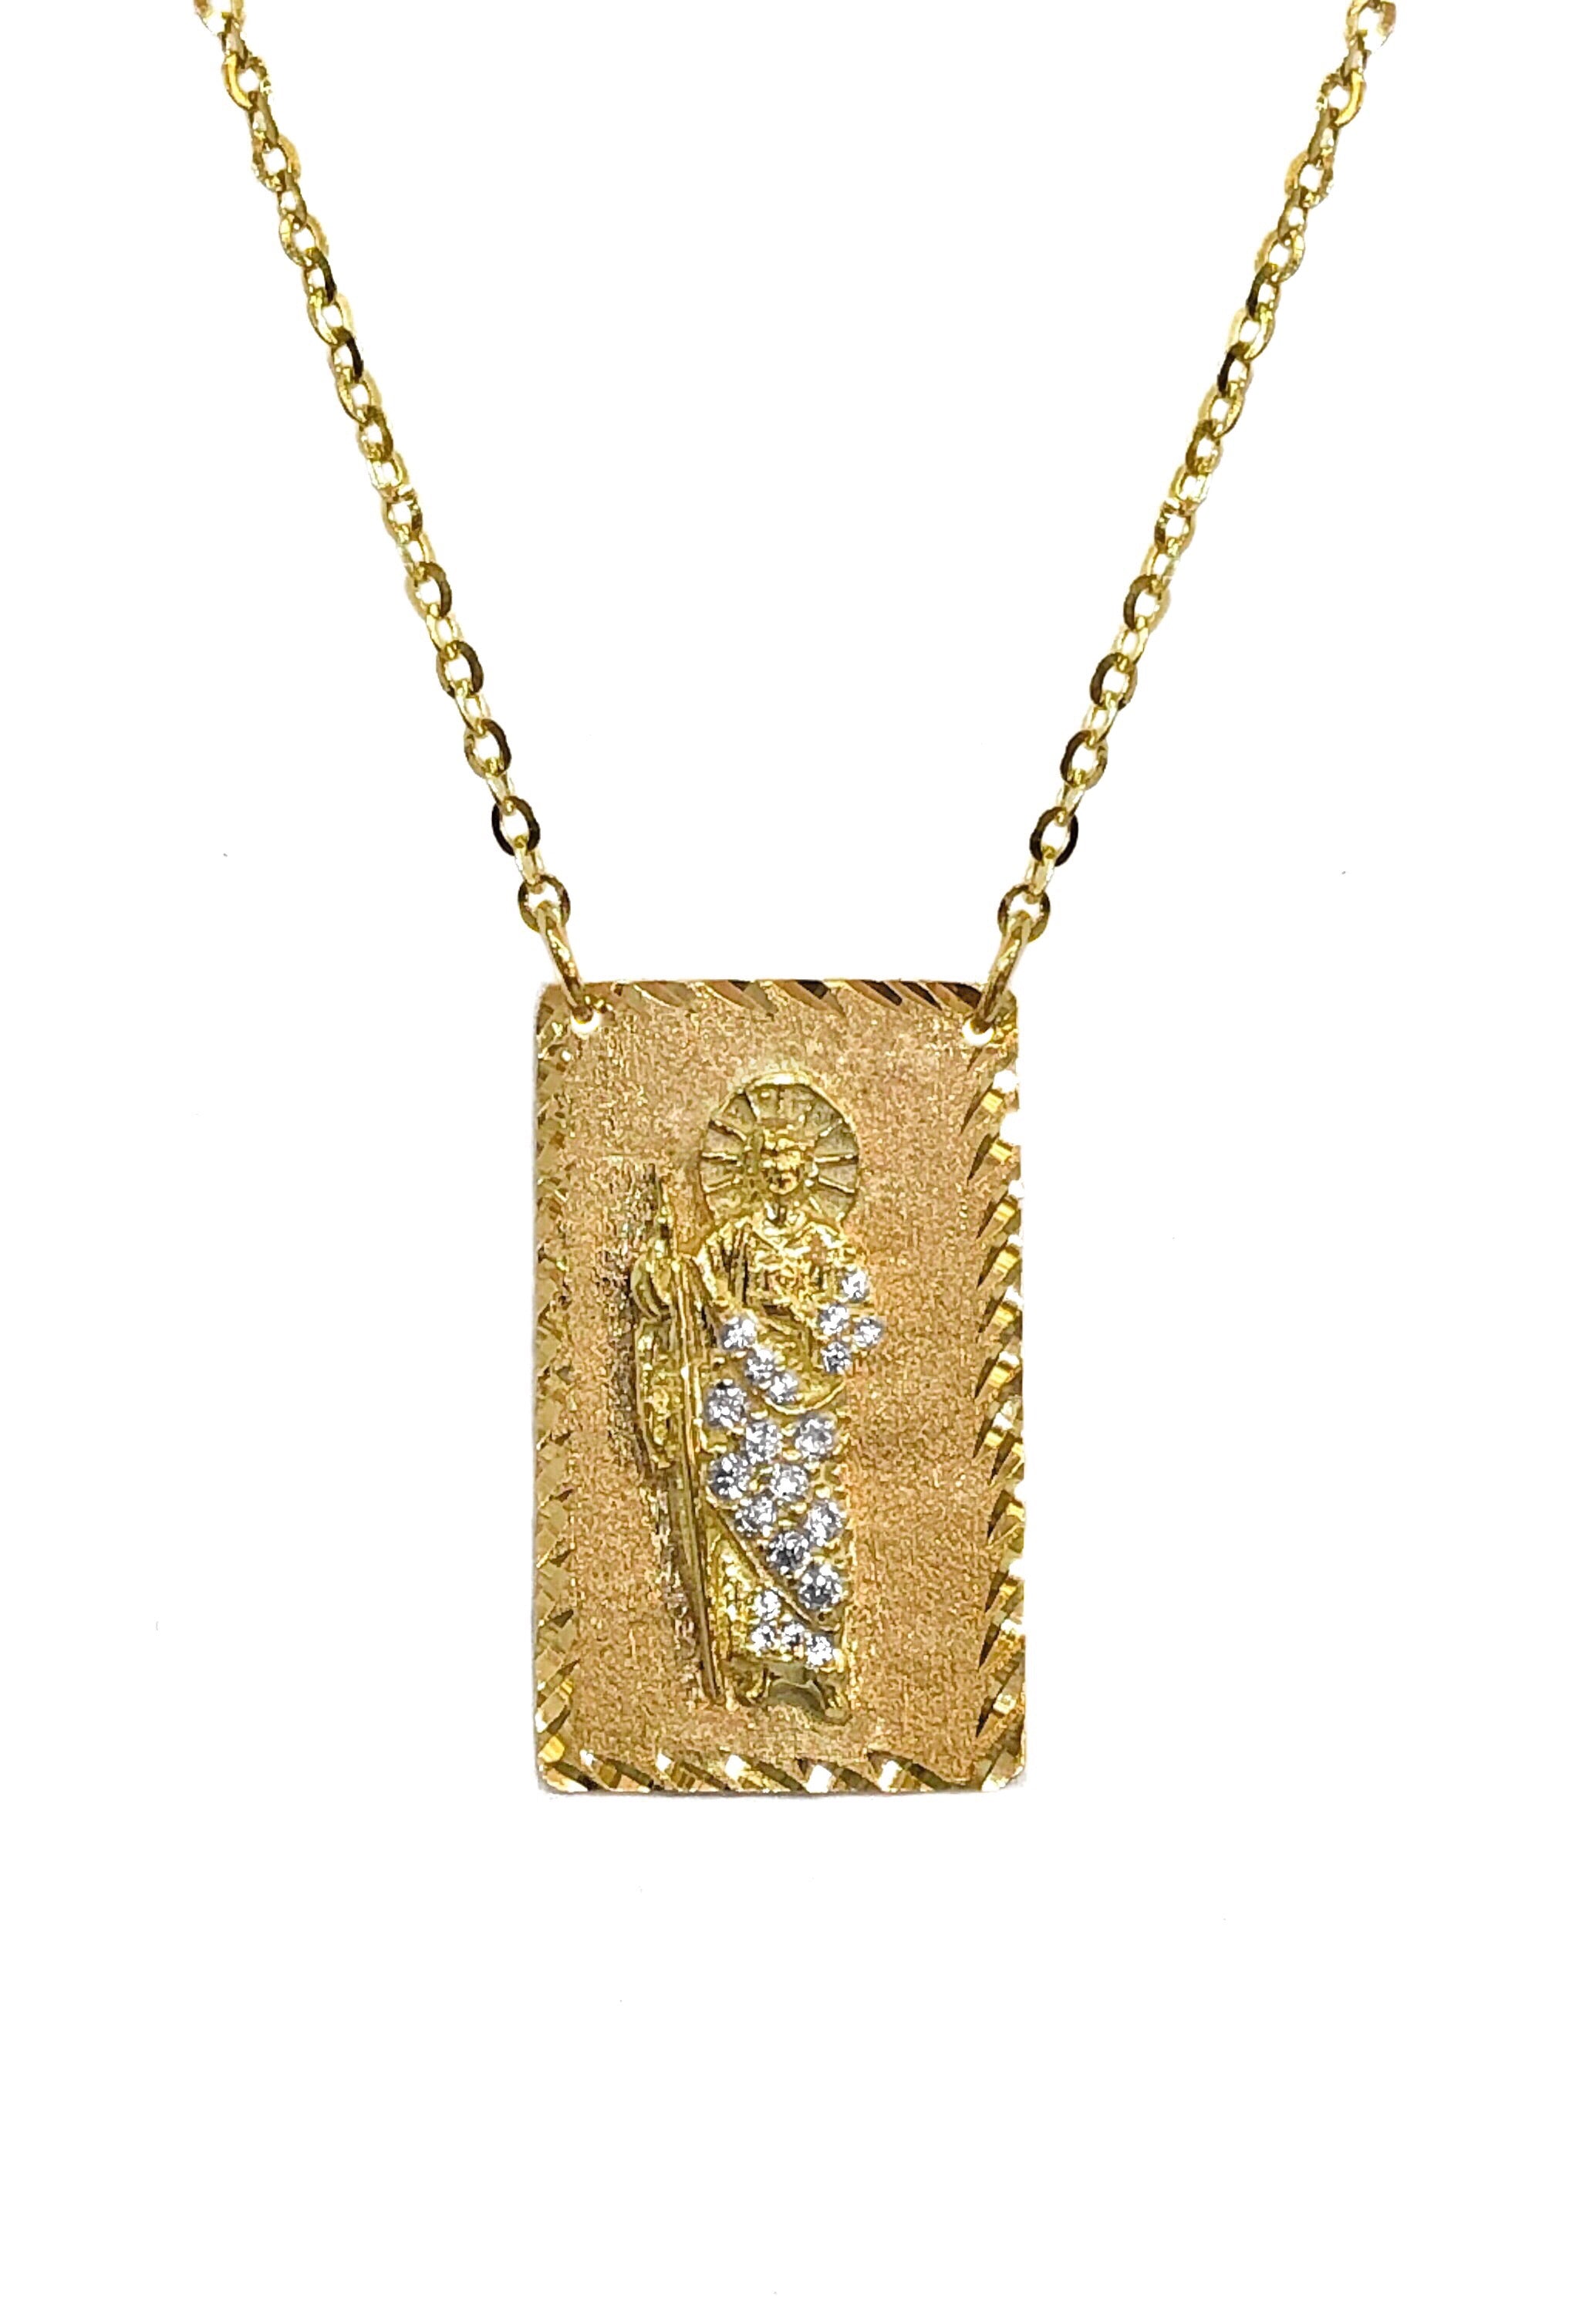 10k Solid Gold Yellow Saan Judas Saaint Jude Pendant Necklace with Cha –  Fran & Co. Jewelry Inc.